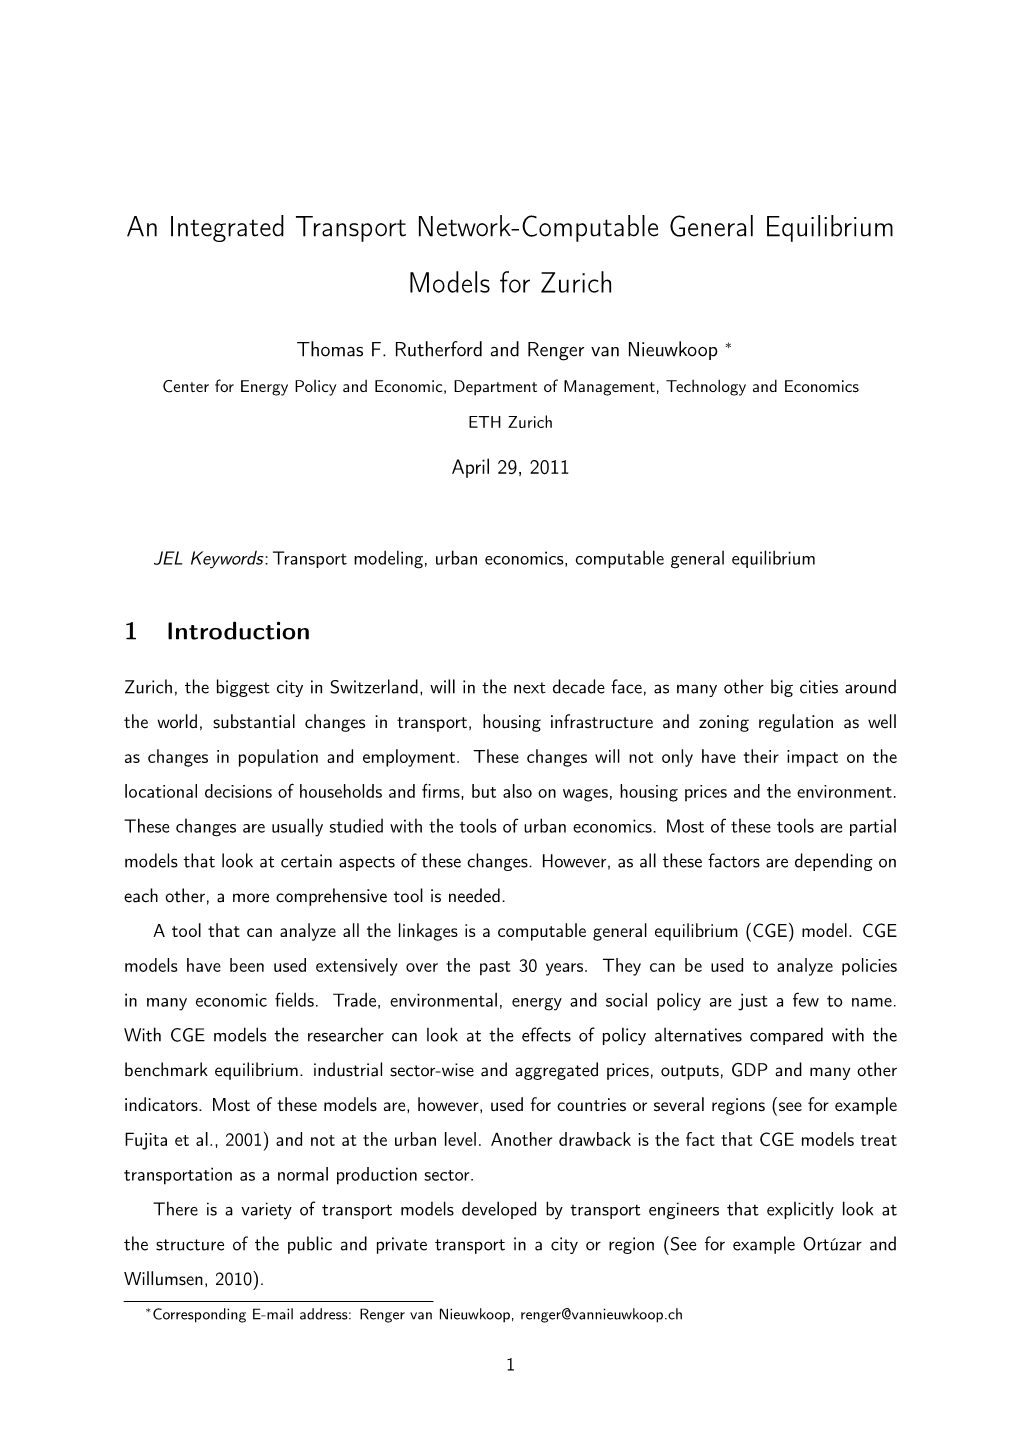 An Integrated Transport Network-Computable General Equilibrium Models for Zurich